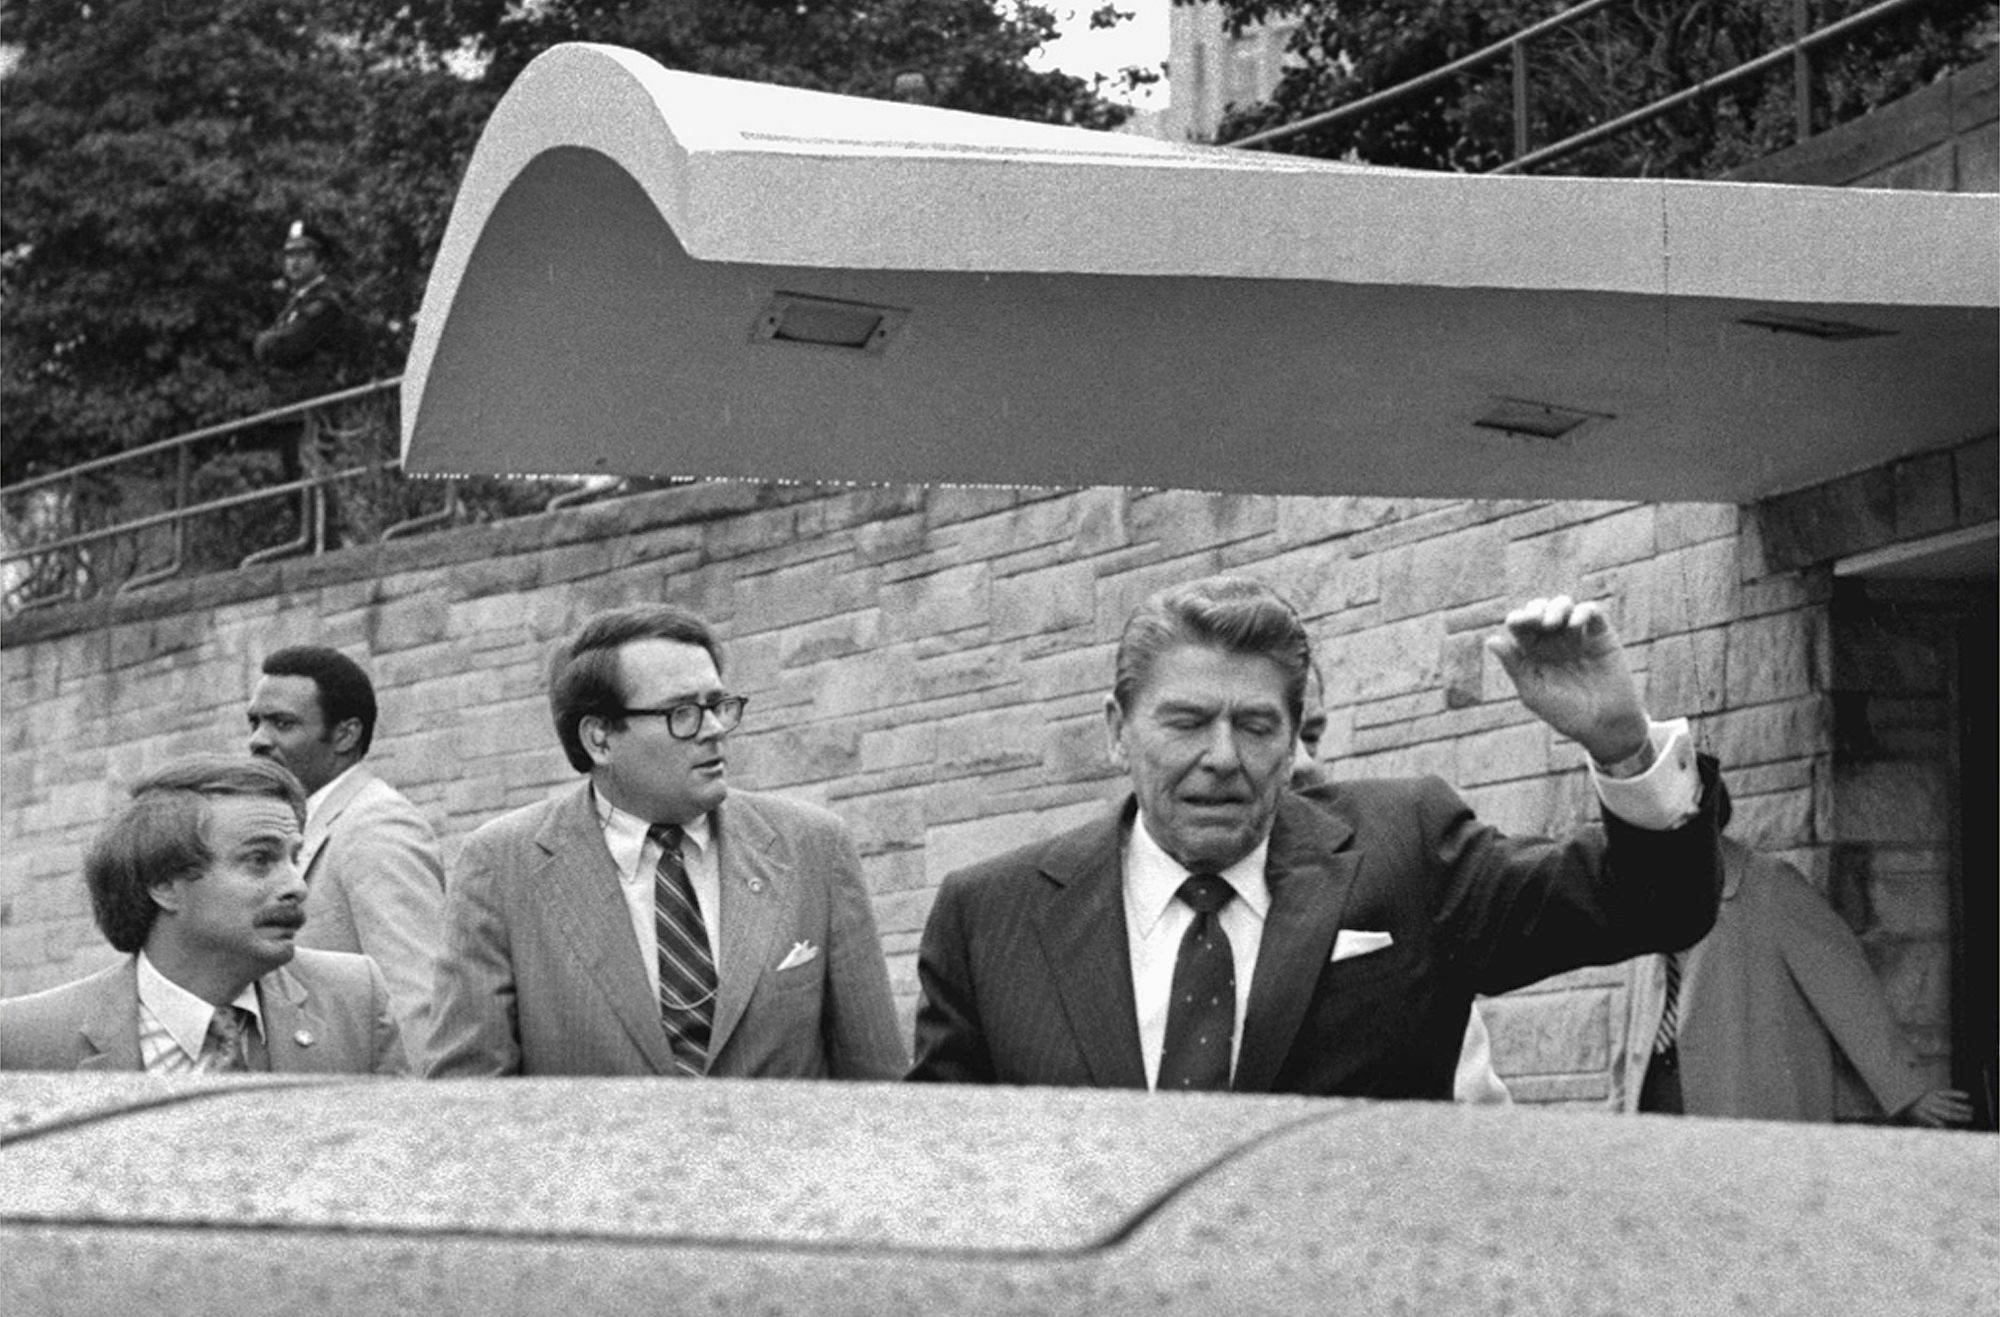 U.S. President Ronald Reagan looks to his left and holds up his left arm as a secret service agent places a hand on his shoulder and pushes the President into his limousine after he was shot leaving a Washington hotel, Monday, March 30, 1981. (AP Photo/Ron Edmonds)